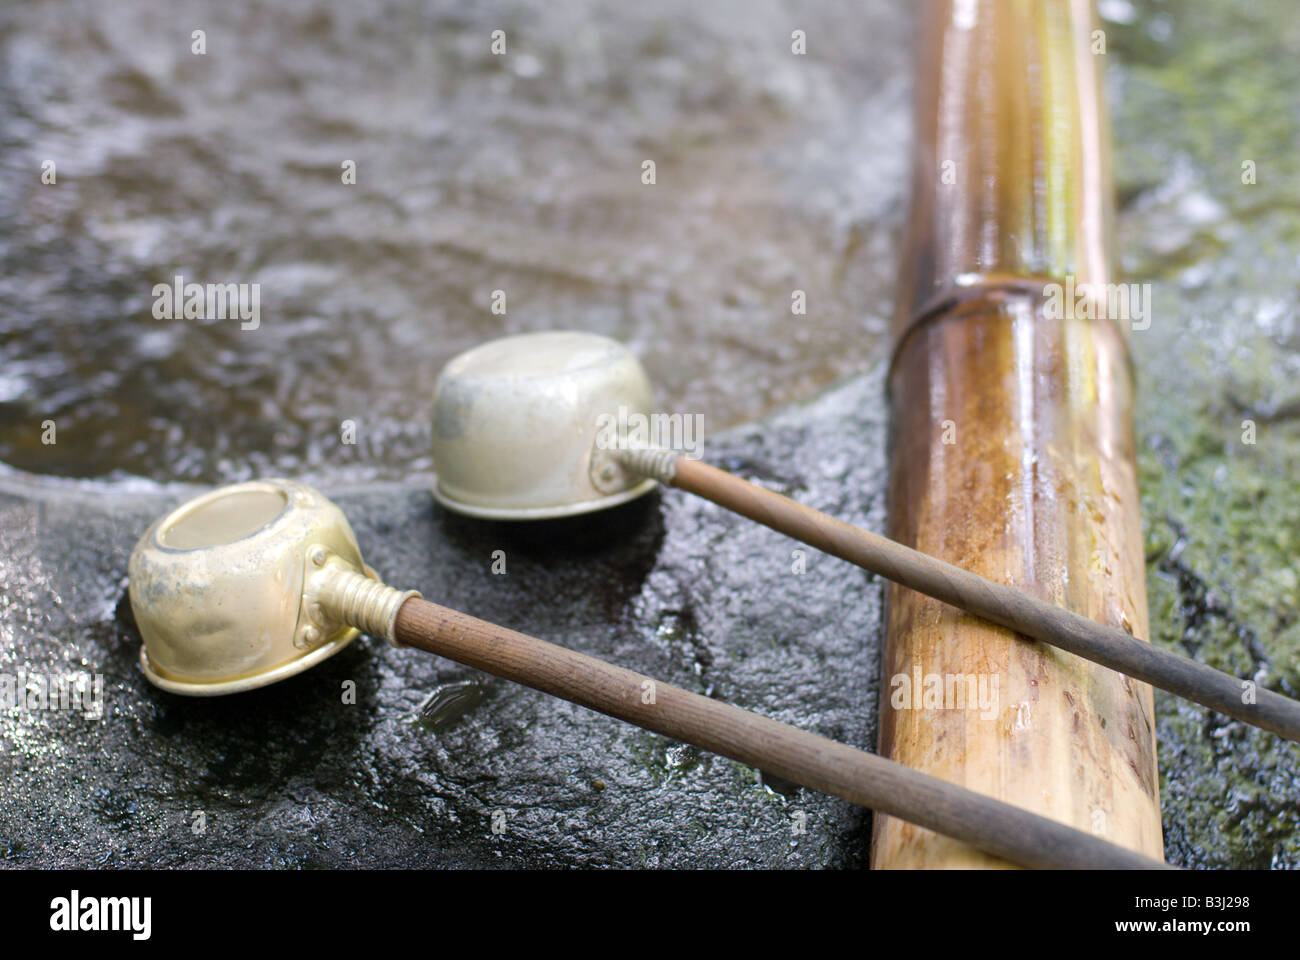 Two scoops on a bamboo rest at a steaming hot-springs chozuya for ritual cleansing before entering a Shinto Shrine Stock Photo